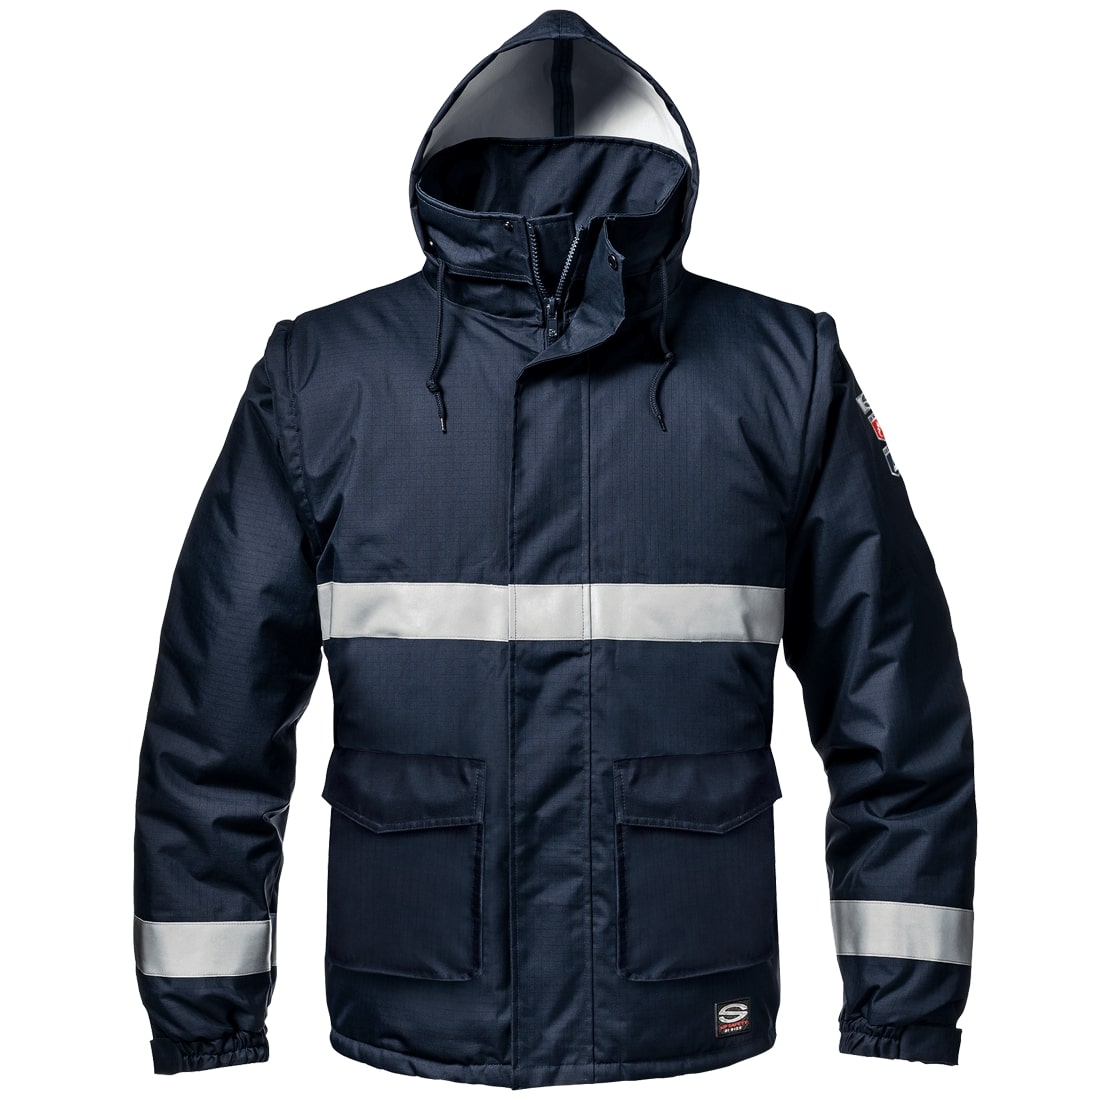 Sir Safety System Microlines blouson